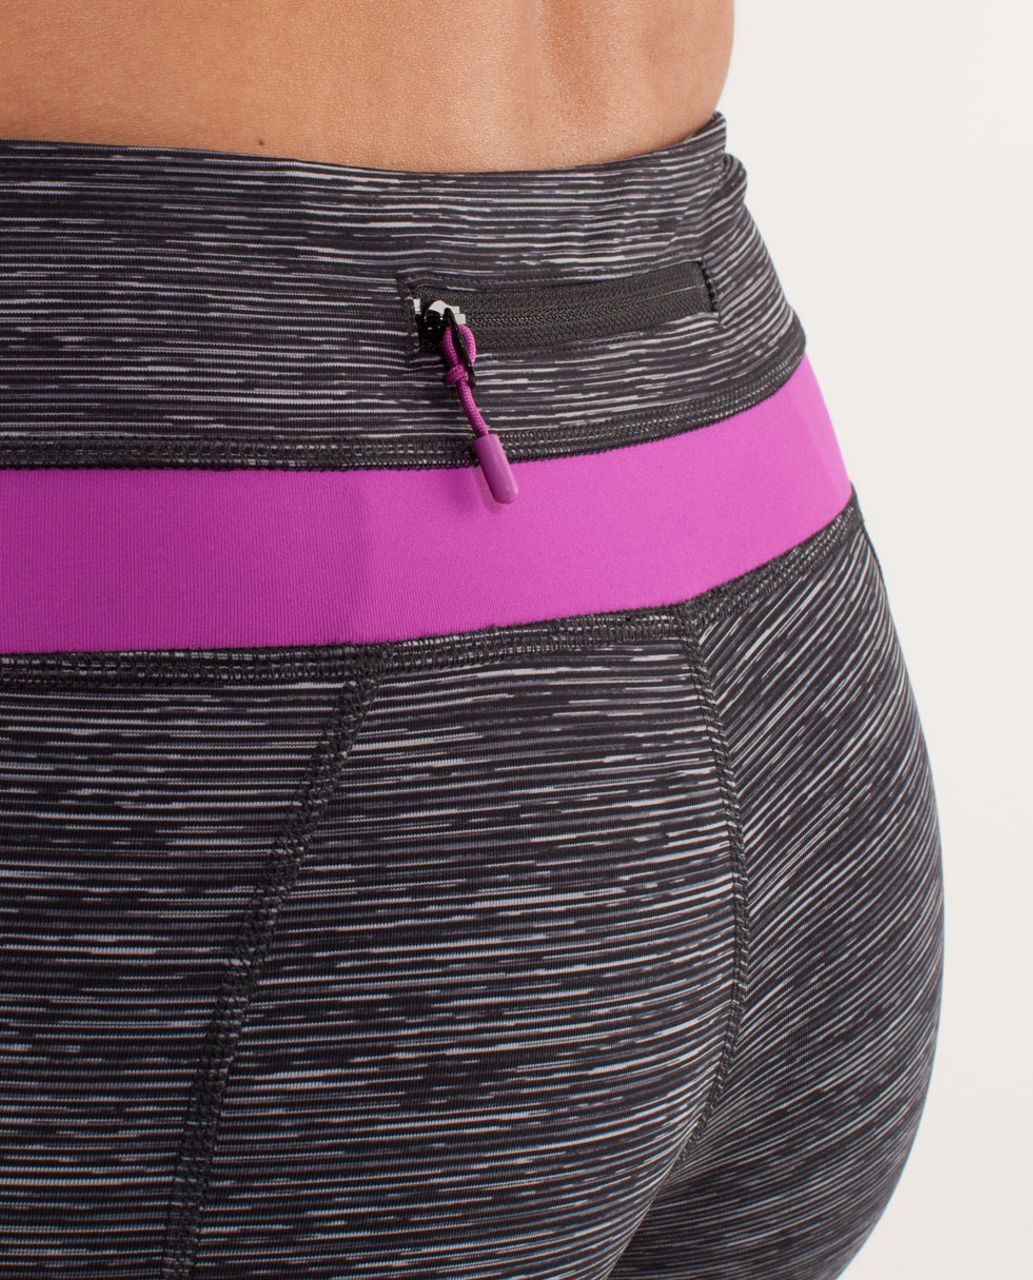 Lululemon Run:  Inspire Crop II - Wee Are From Space Black Combo /  Ultra Violet